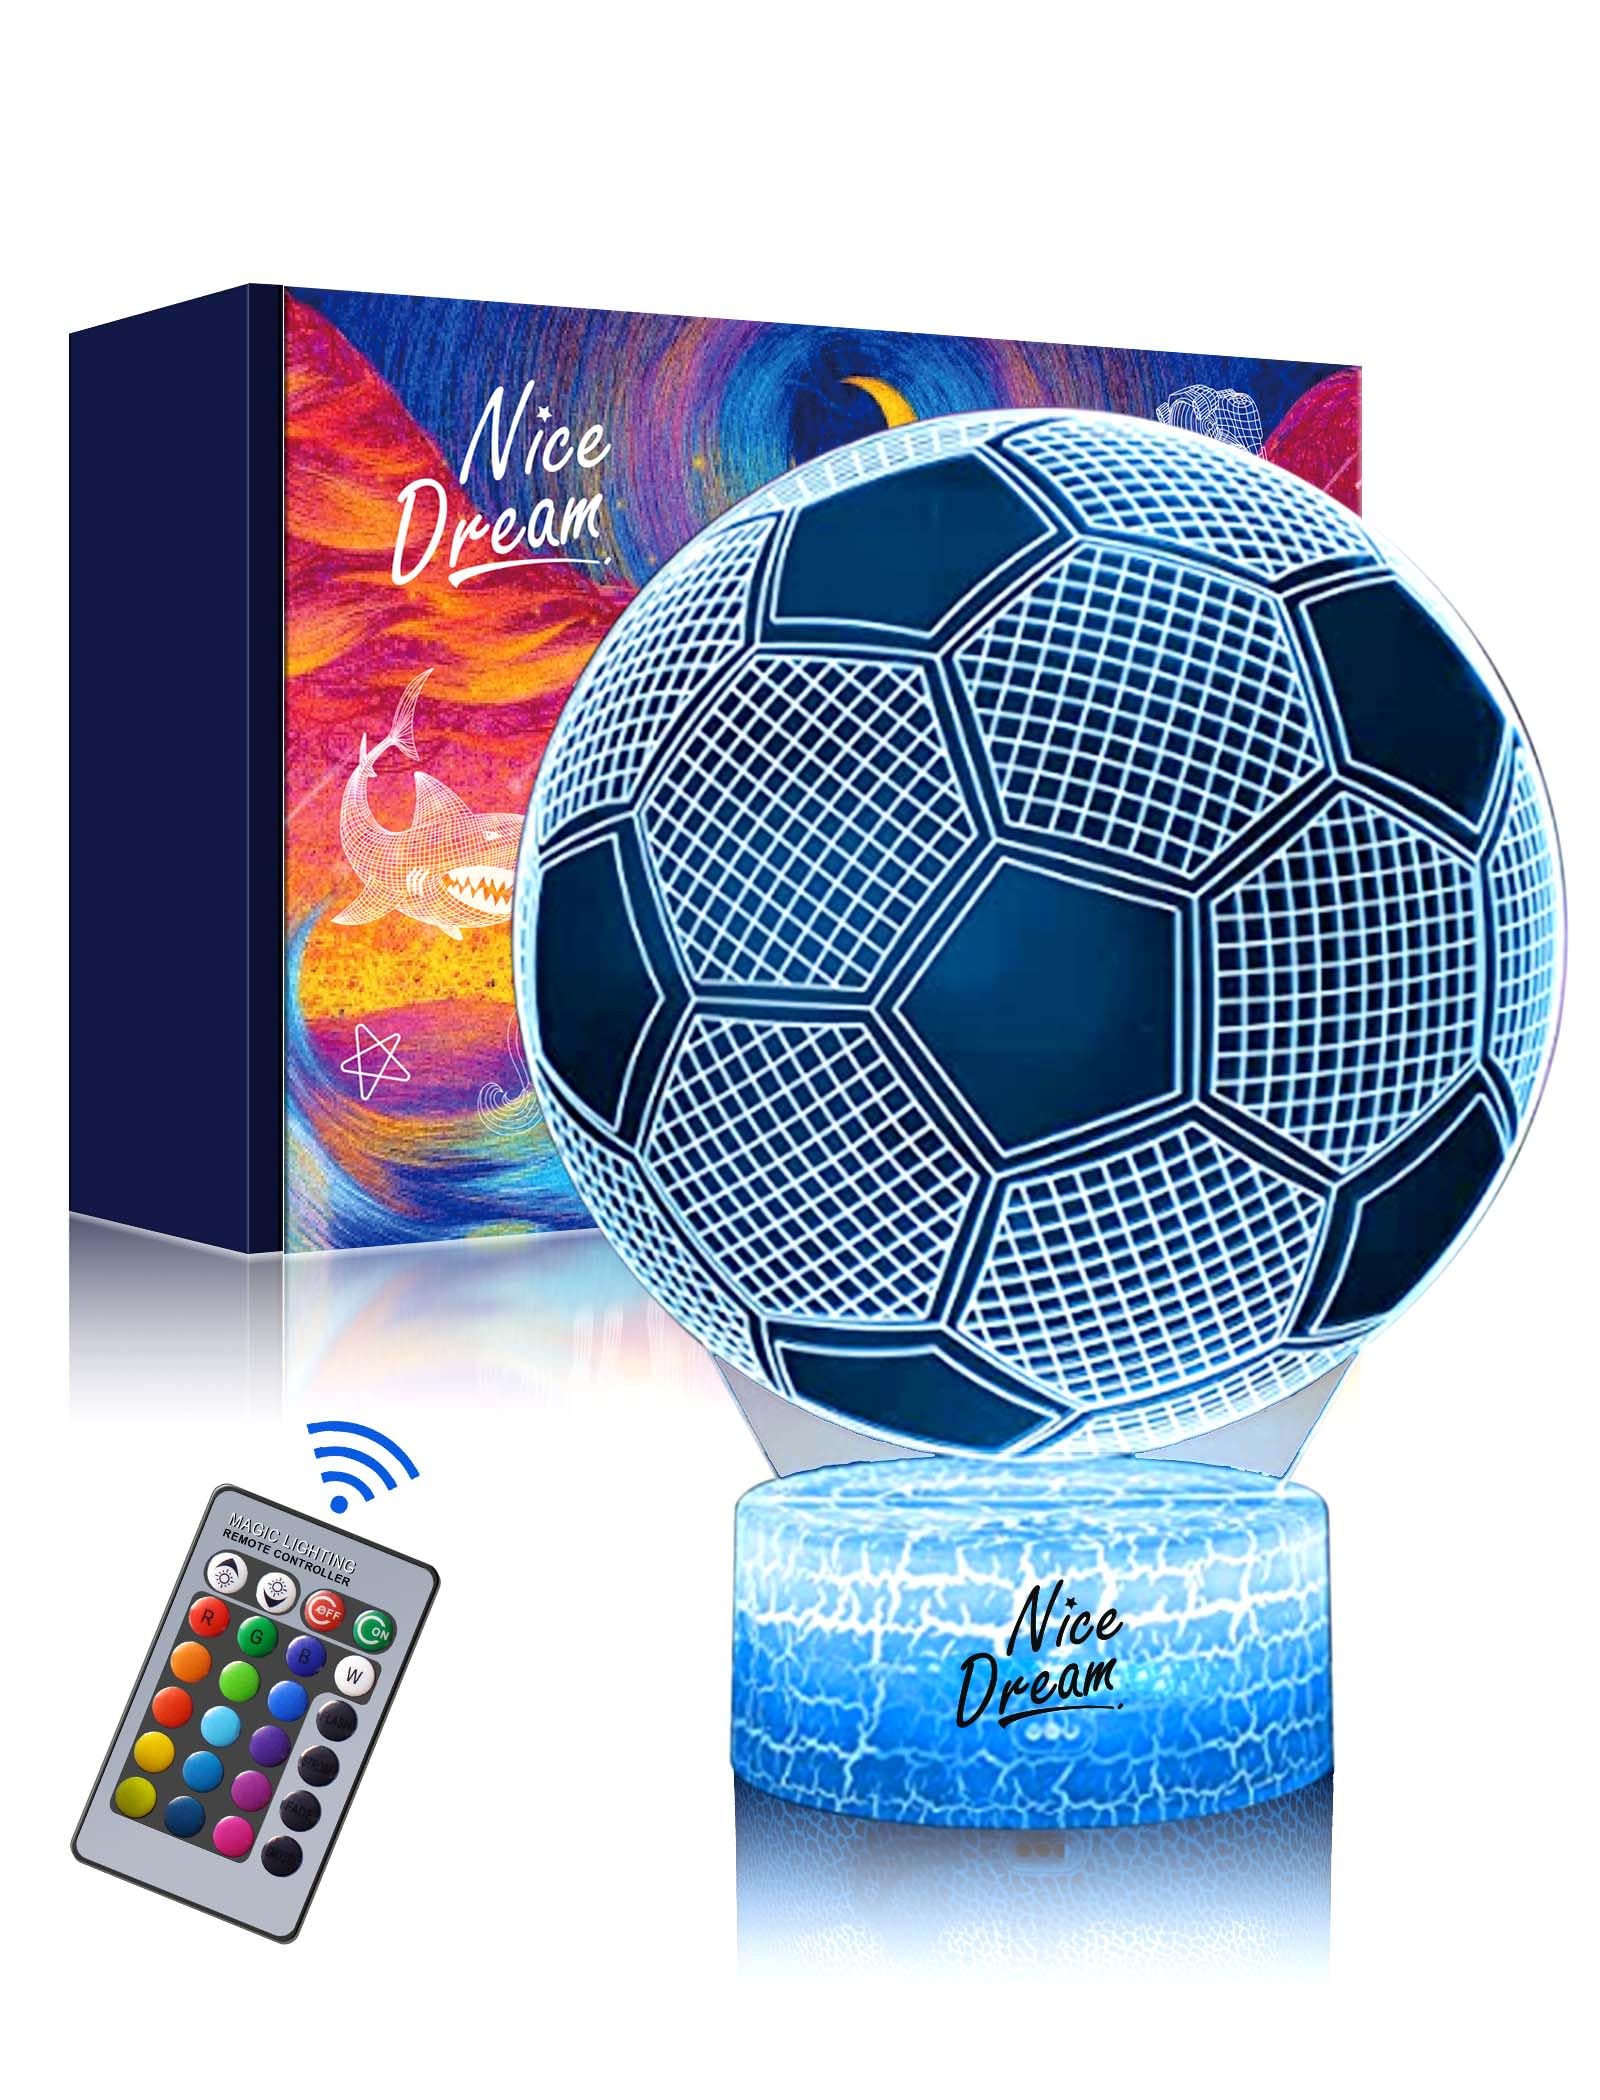 12 X NICE DREAM CROWN SOCCER NIGHT LIGHT FOR KIDS, 3D ILLUSION NIGHT LAMP, 16 COLORS CHANGING WITH REMOTE CONTROL, ROOM DECOR, GIFTS FOR CHILDREN BOYS GIRLS - TOTAL RRP £130: LOCATION - RACK A